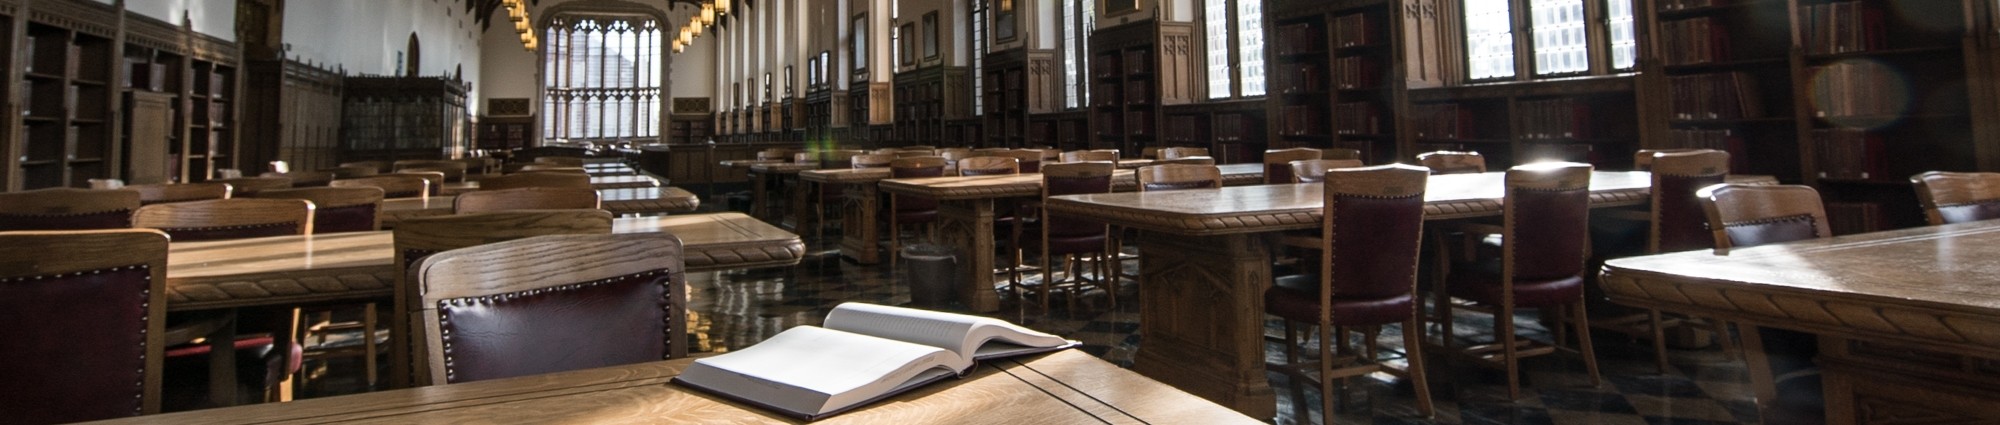 Books and desks in the Great Reading Room in Bizzell Memorial Library.